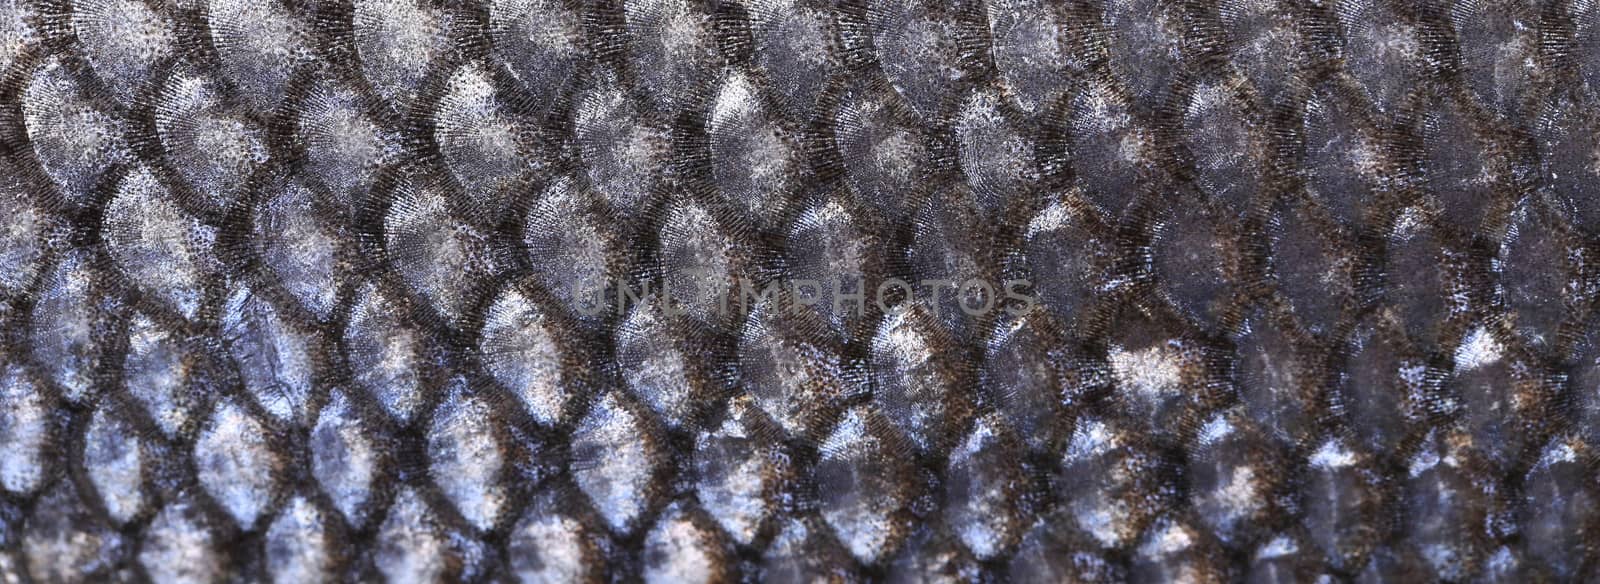 Close up of seabass scale texture. by indigolotos